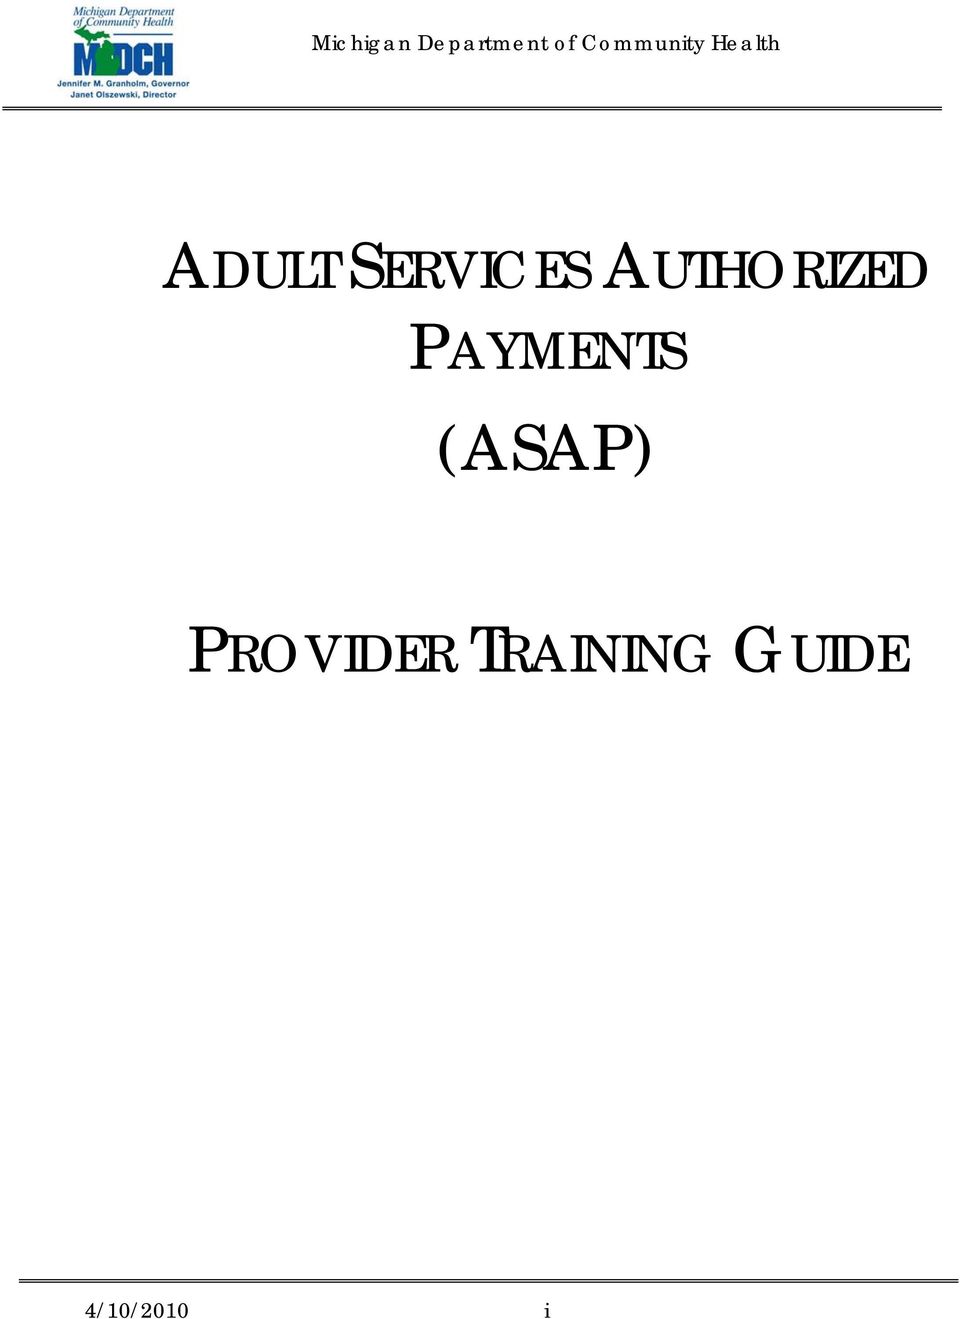 SERVICES AUTHORIZED PAYMENTS